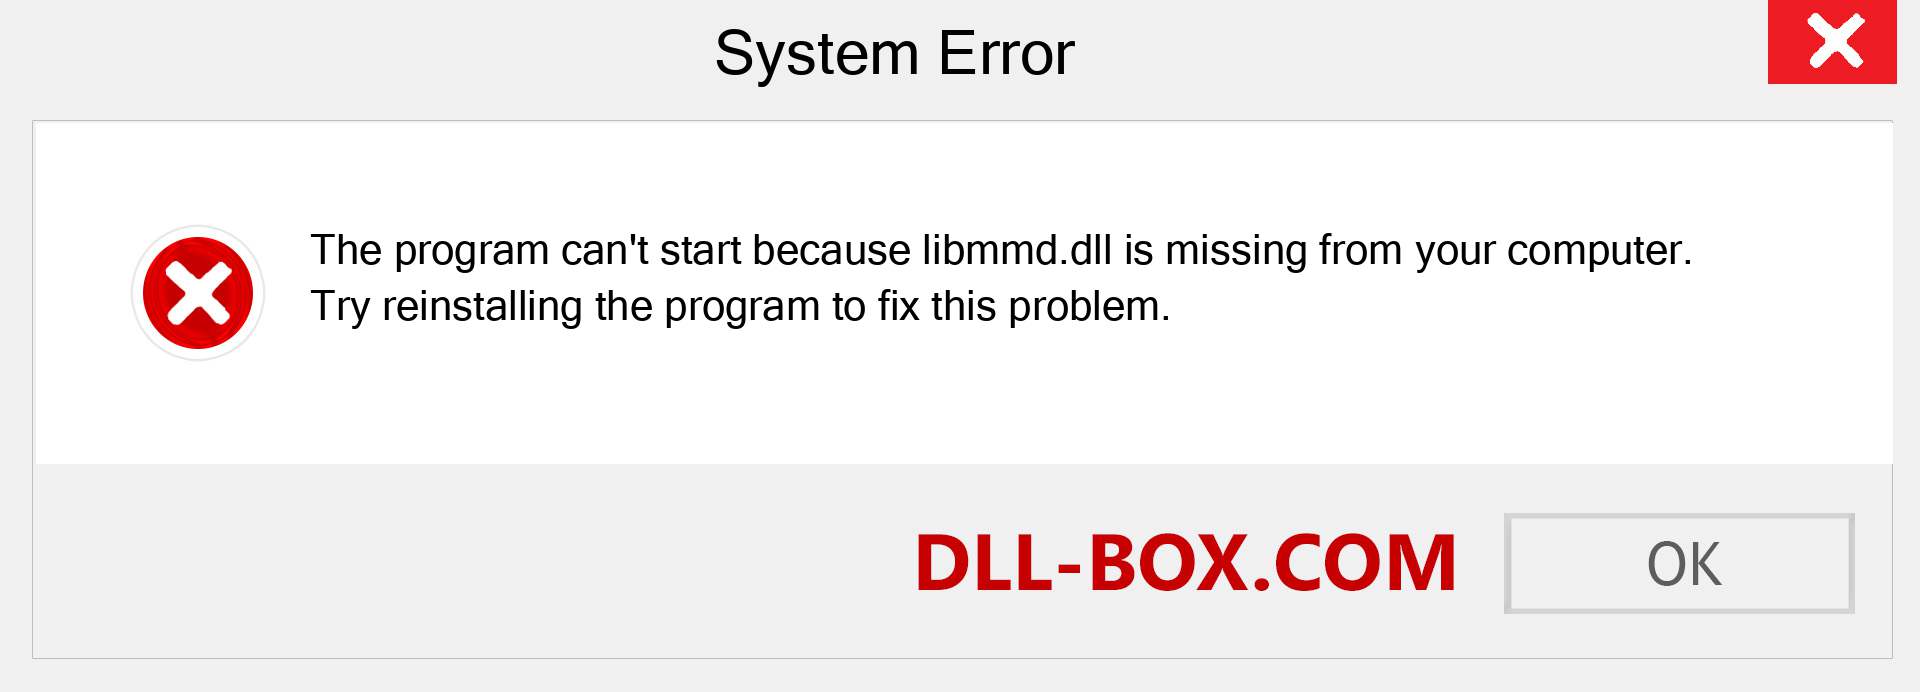  libmmd.dll file is missing?. Download for Windows 7, 8, 10 - Fix  libmmd dll Missing Error on Windows, photos, images